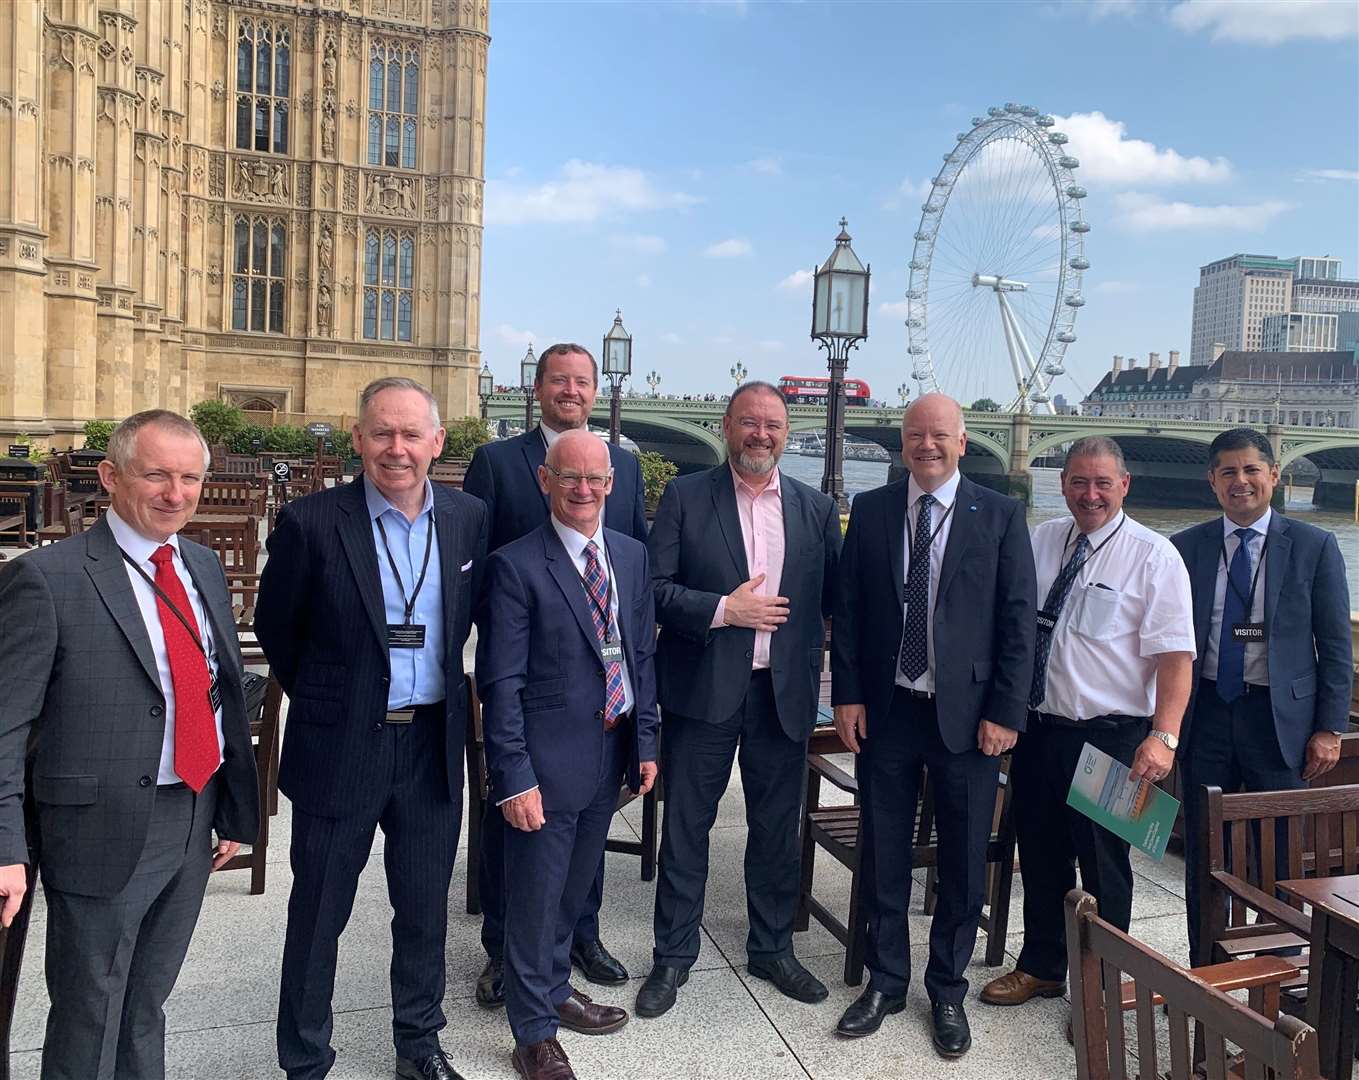 The North-East Scotland Green Freeport Bid group took its plans to Westminster at a business forum hosted by MP David Duguid.